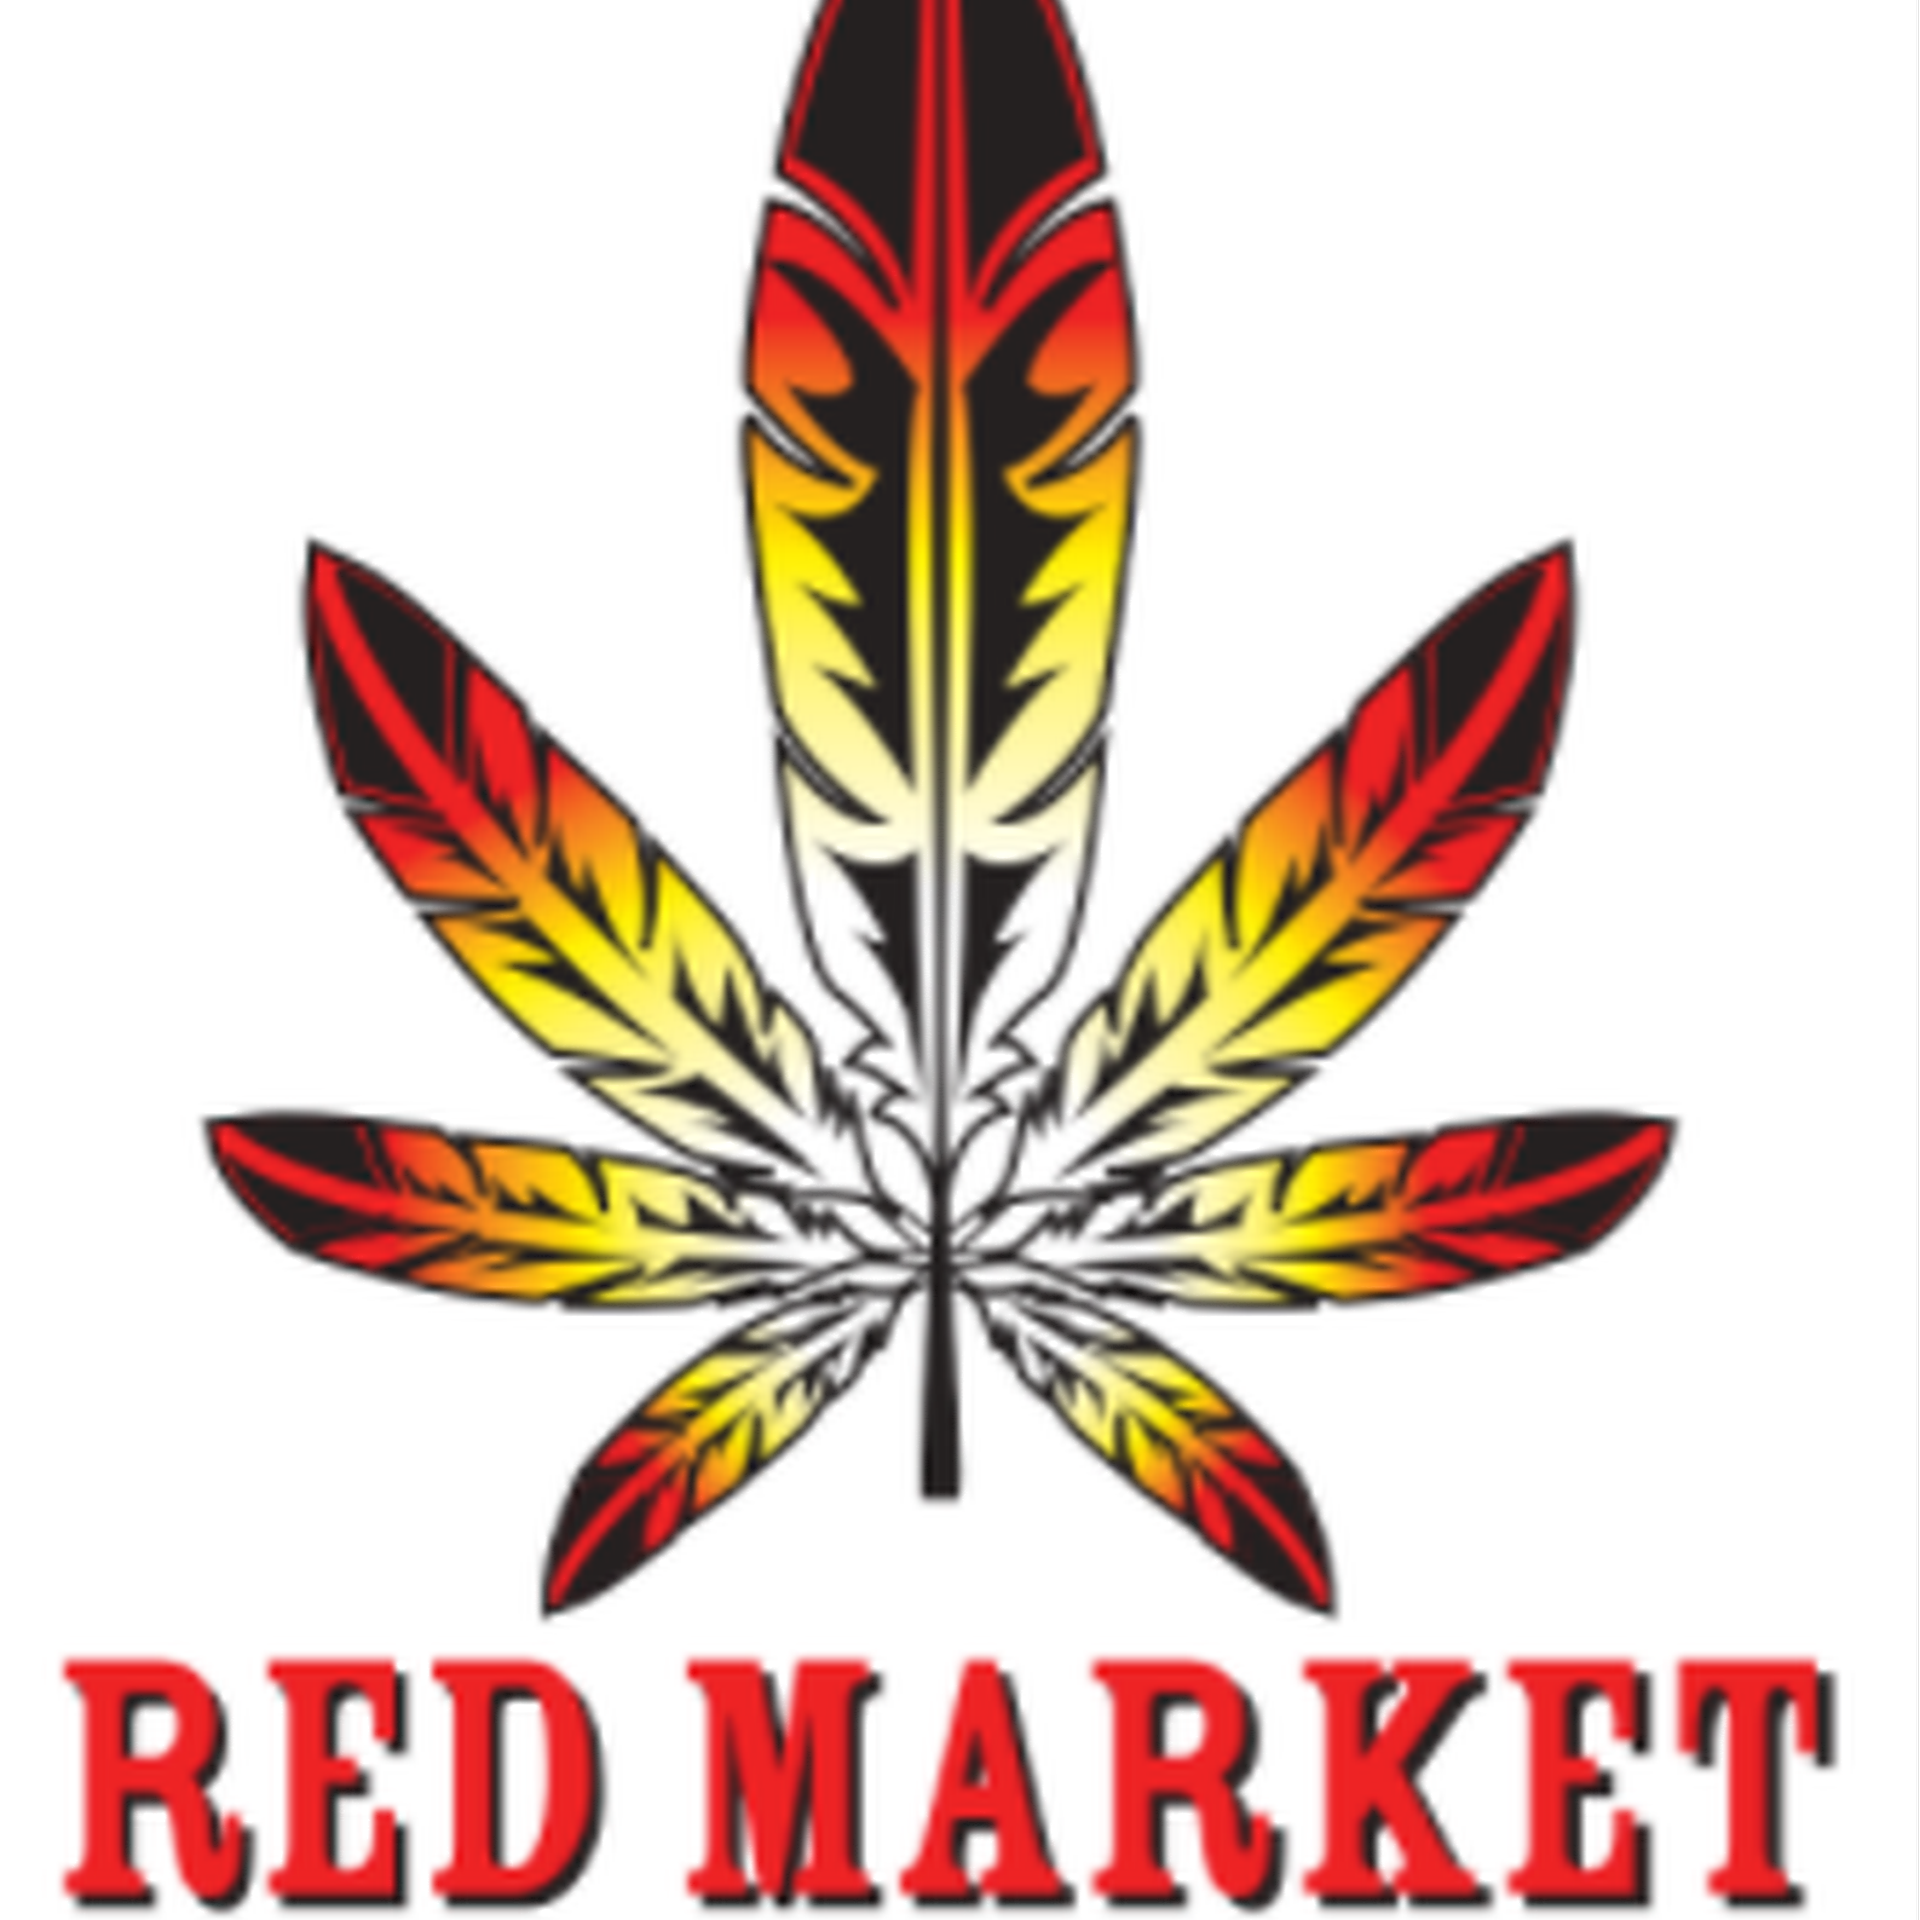 Cannabis Store Redmarket Trading Co - 0